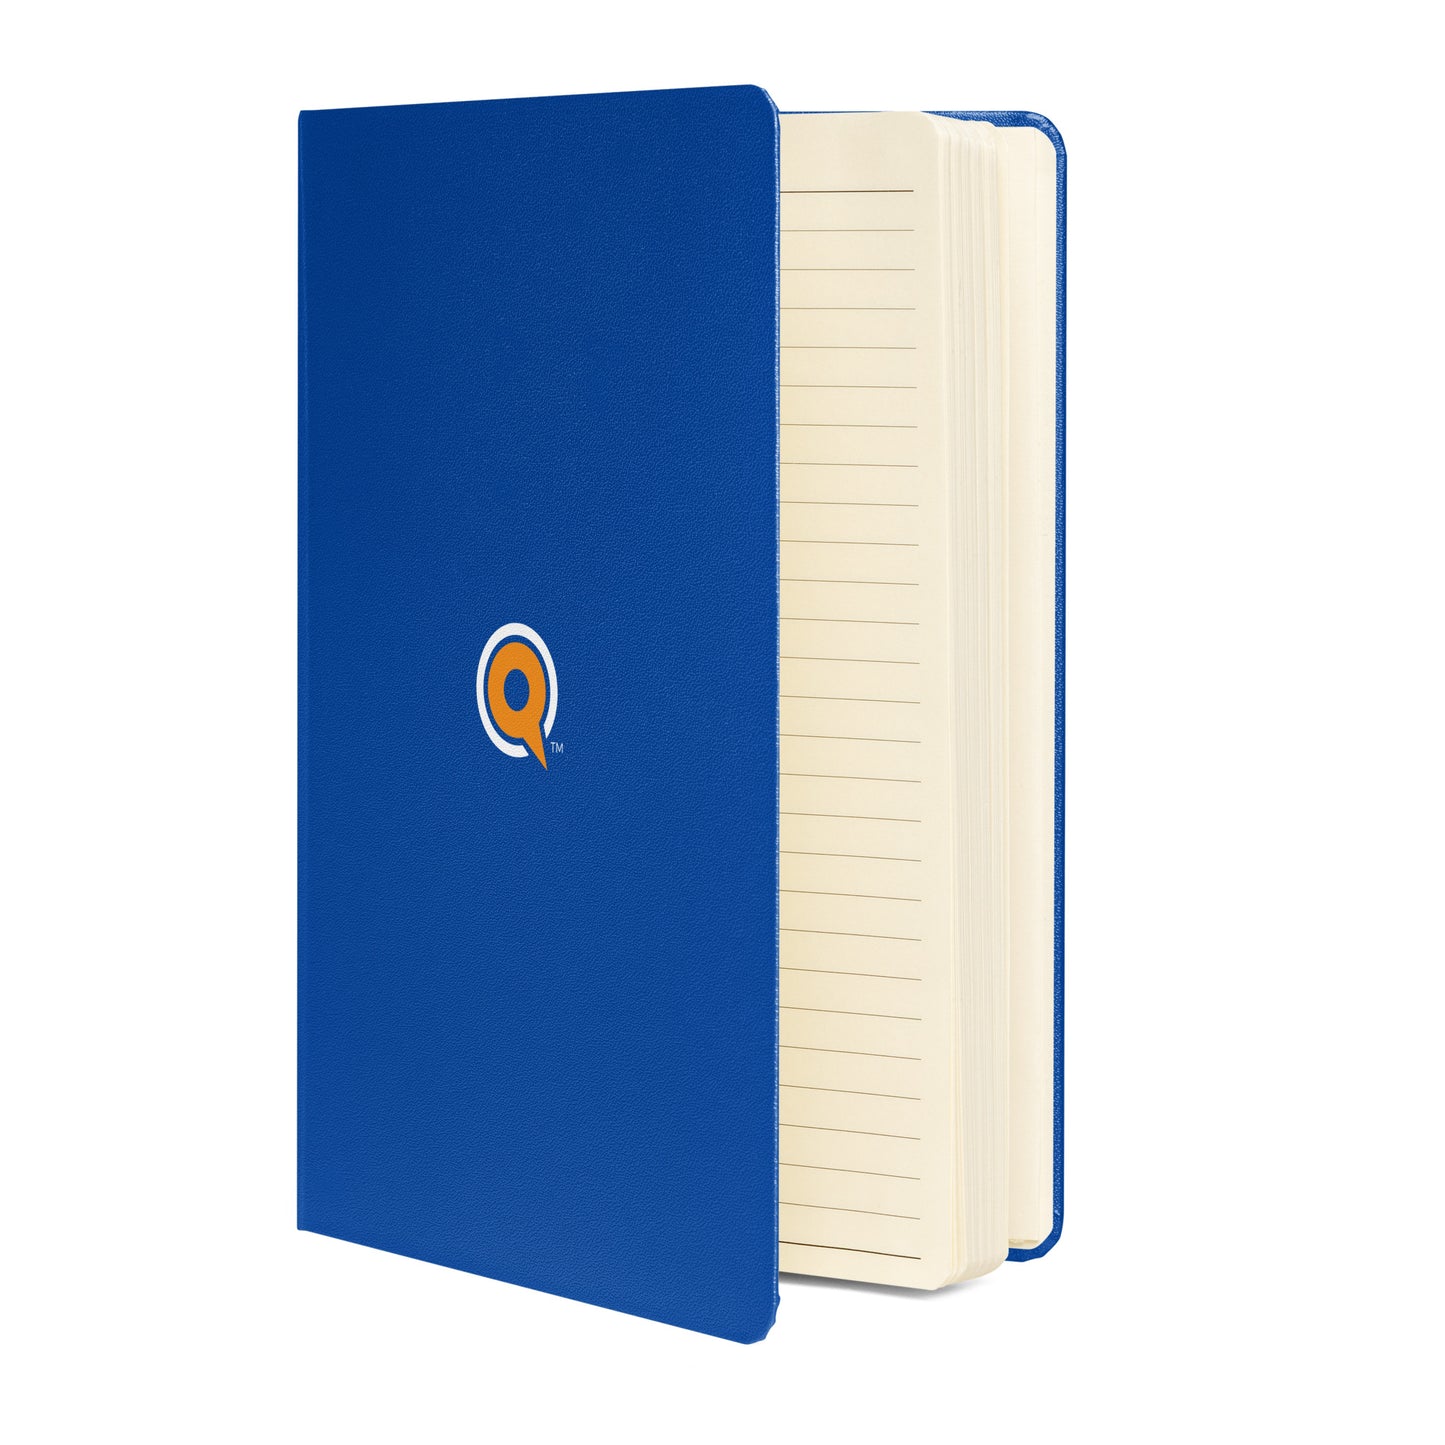 Yaqeen Q Hardcover Notebook